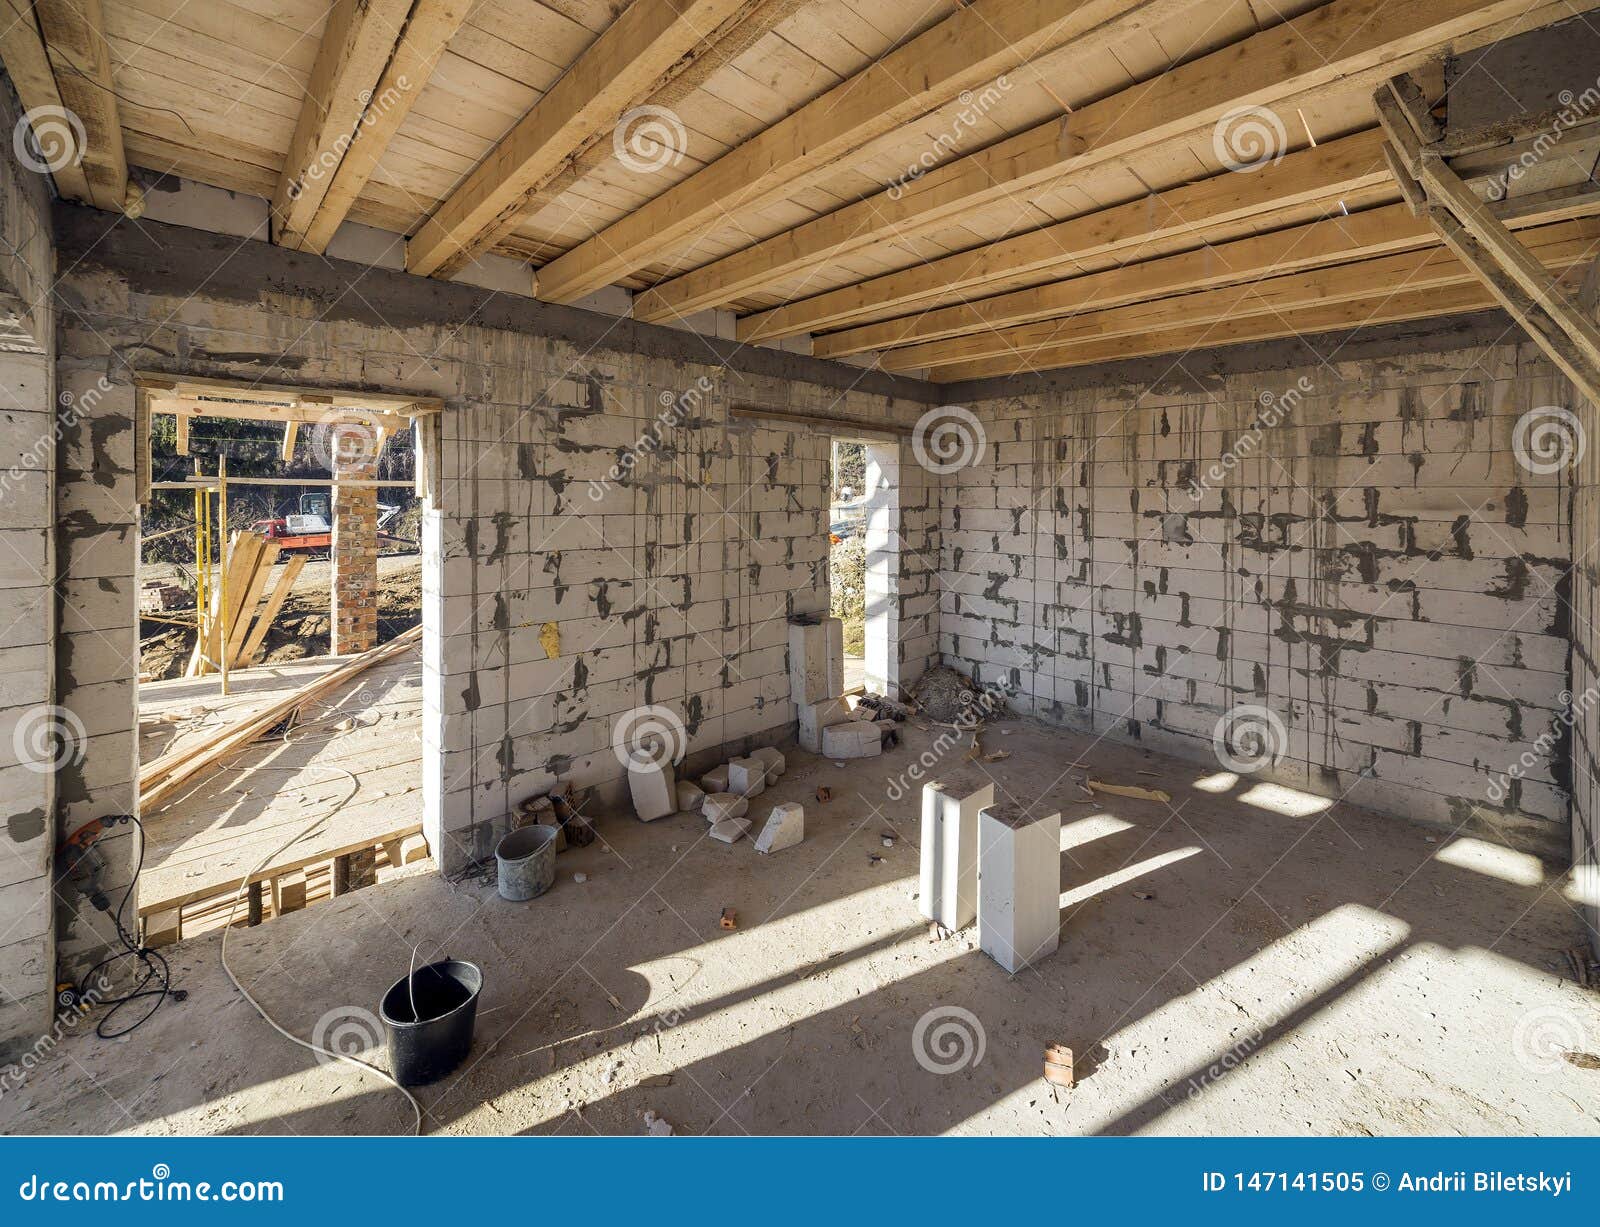 House Room Interior Under Construction And Renovation